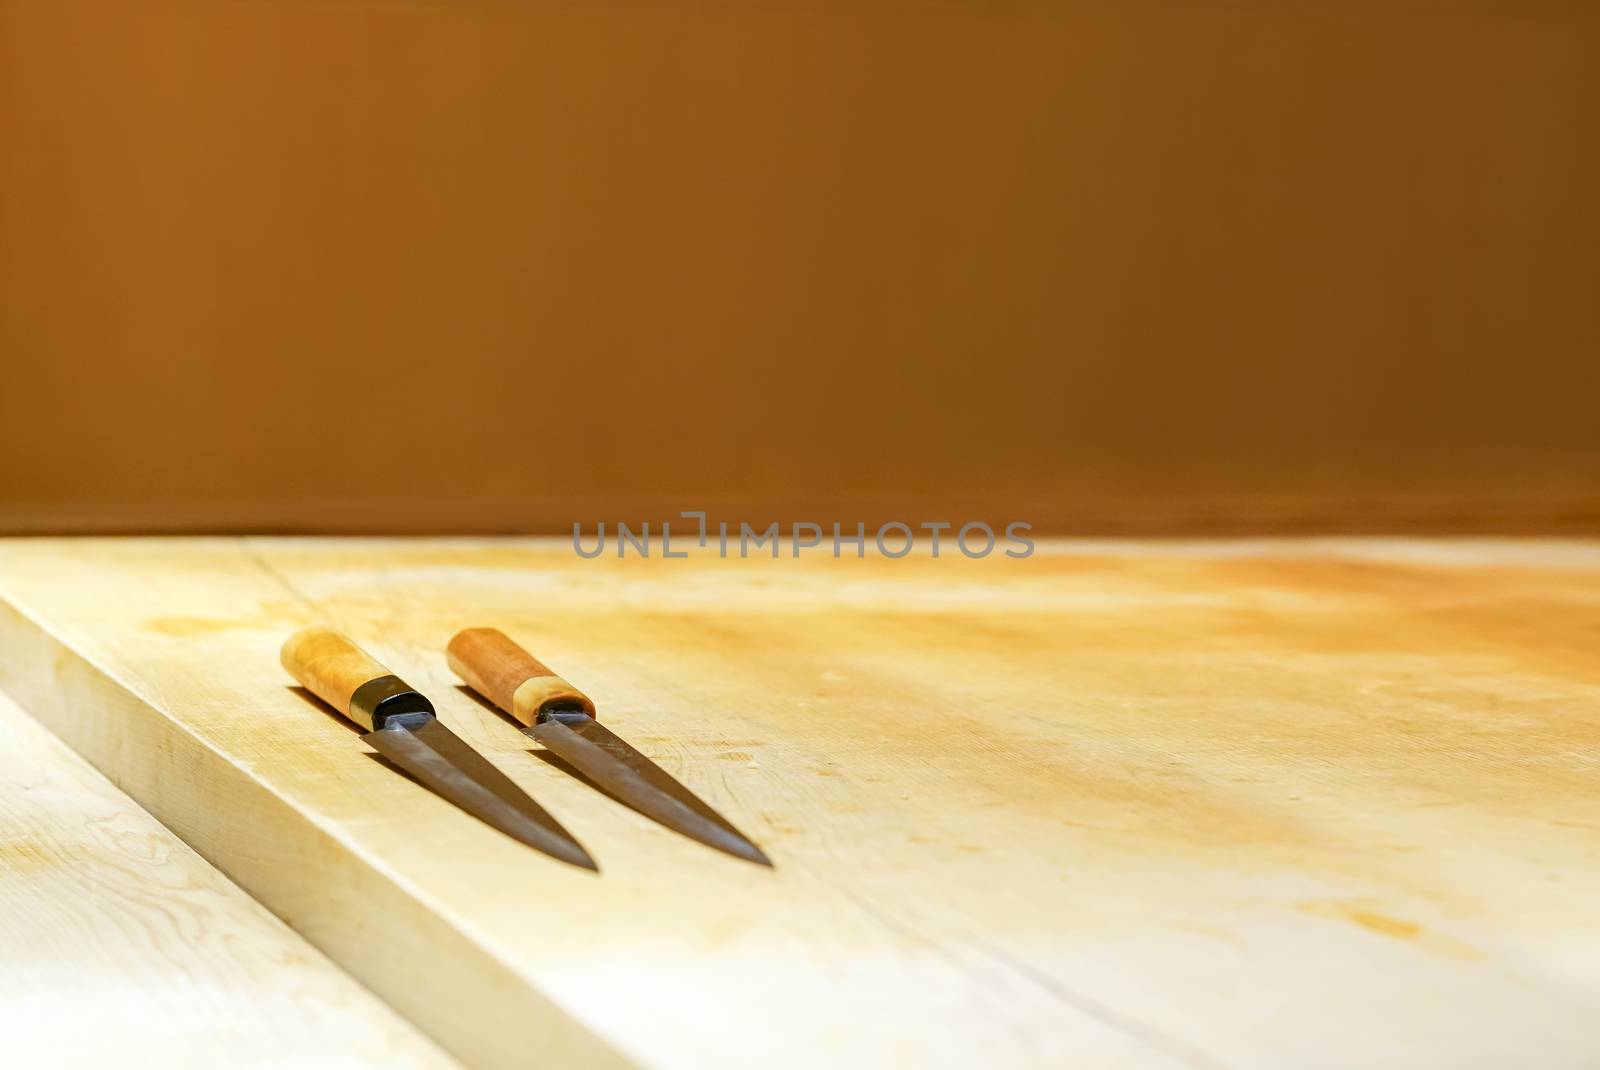 2 sushi knives on a wooden counter. Enjoy Omakase experience at Japanese Sushi Restaurant.